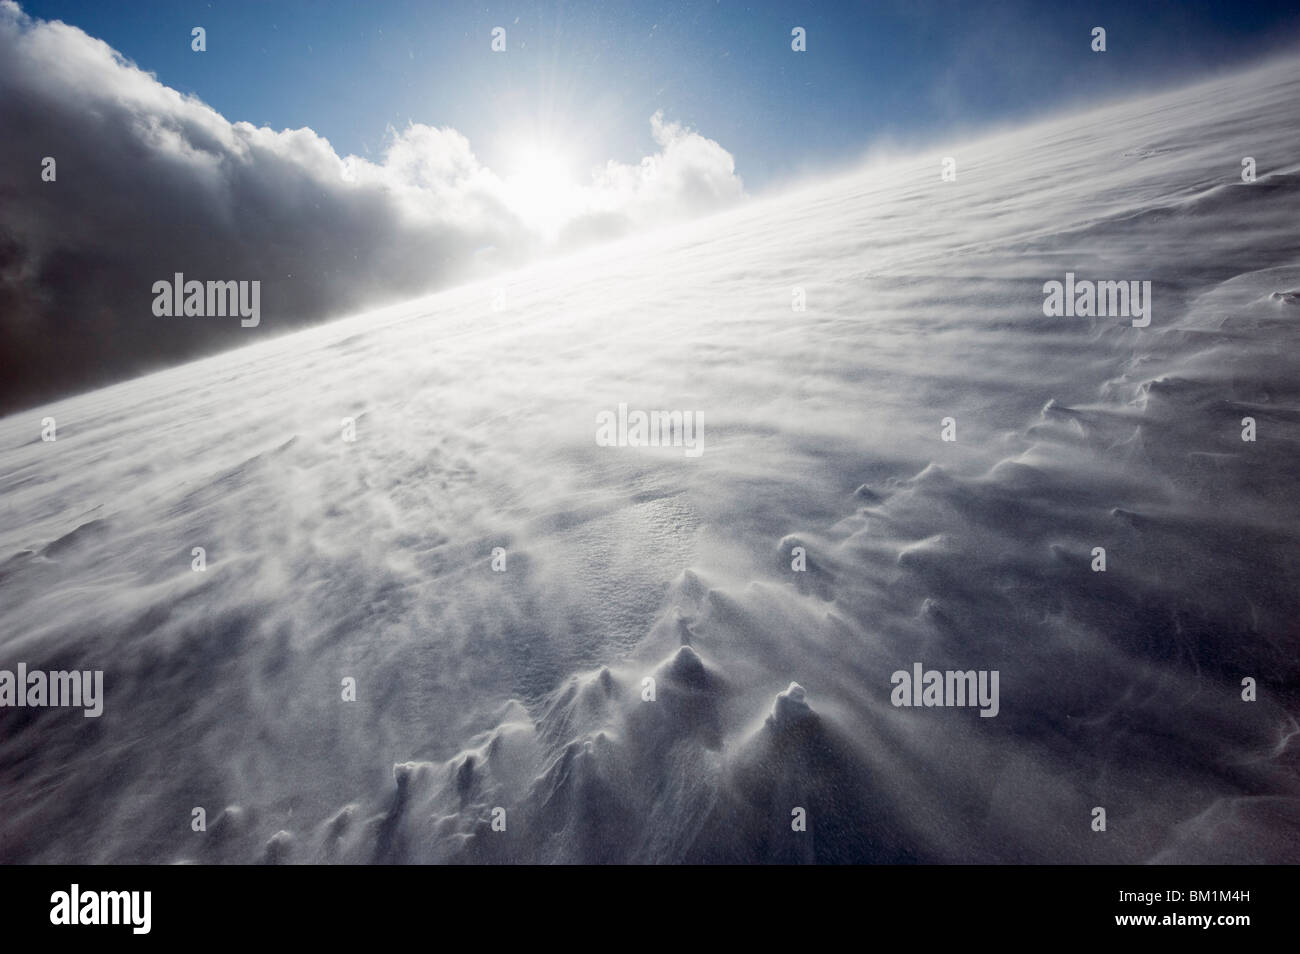 Wind blowing over snow covered Mount Fuji, Shizuoka Prefecture, Japan, Asia Stock Photo